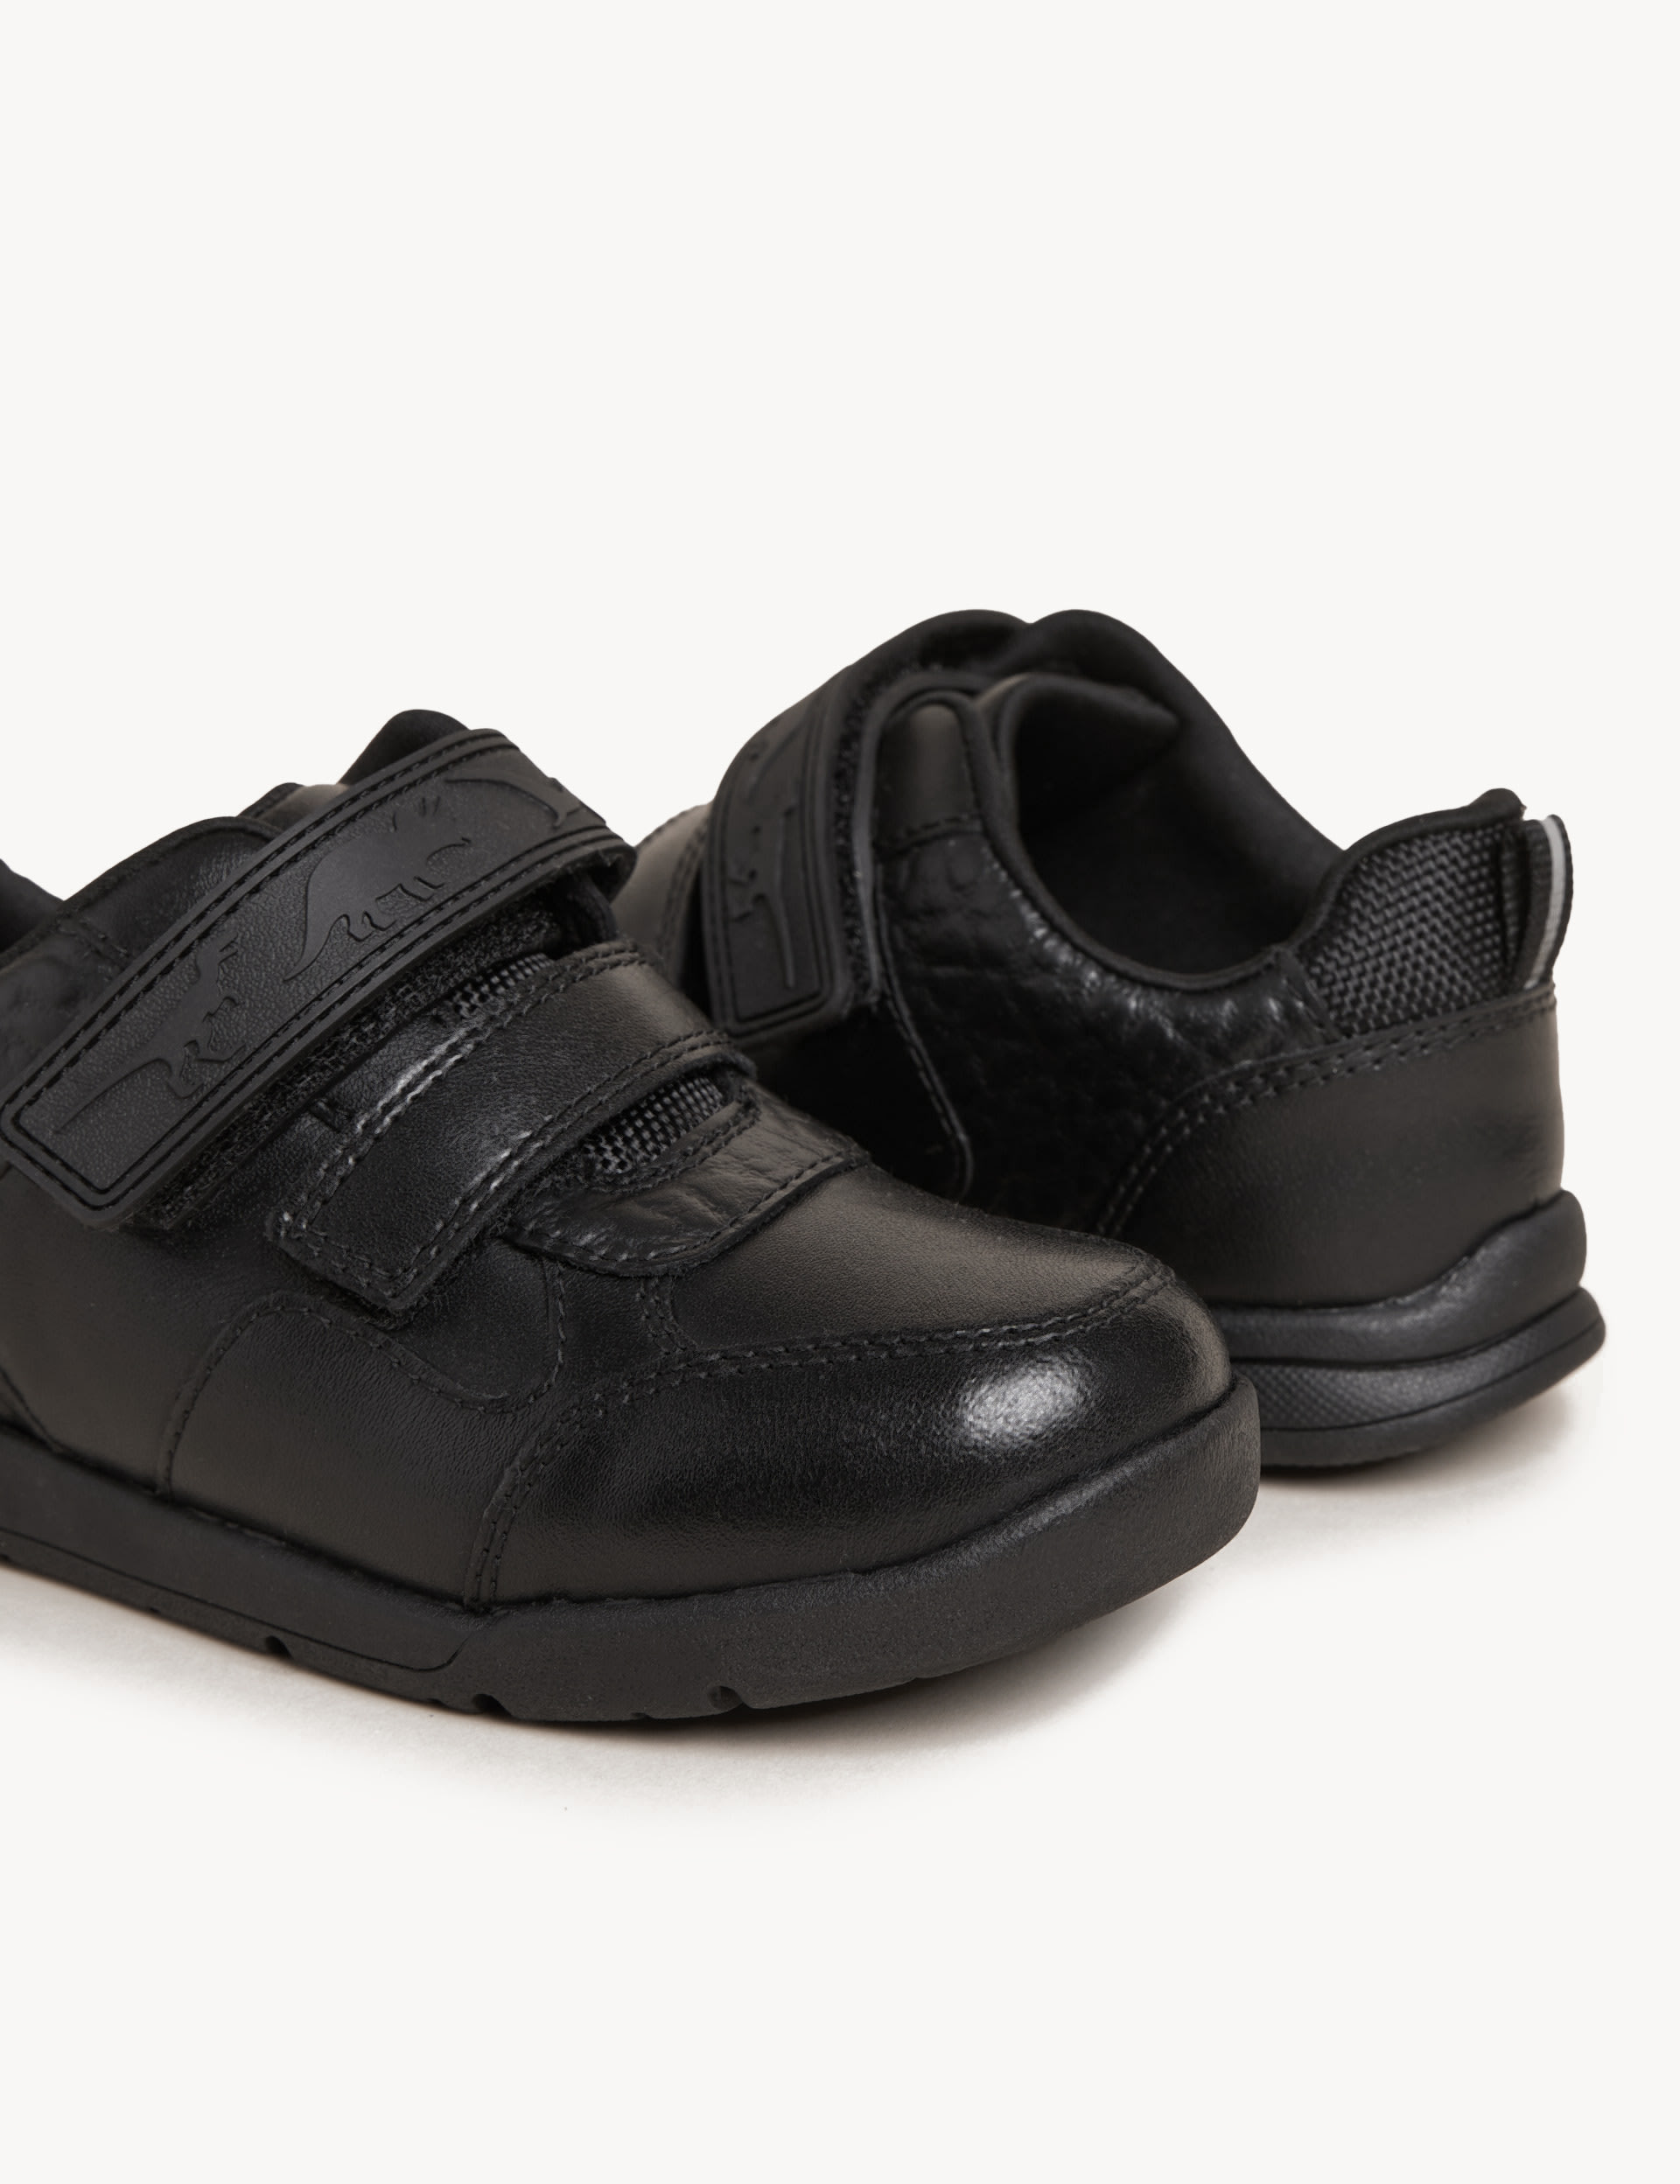 Kids' Leather School Shoes (8 Small - 2 Large) 3 of 5